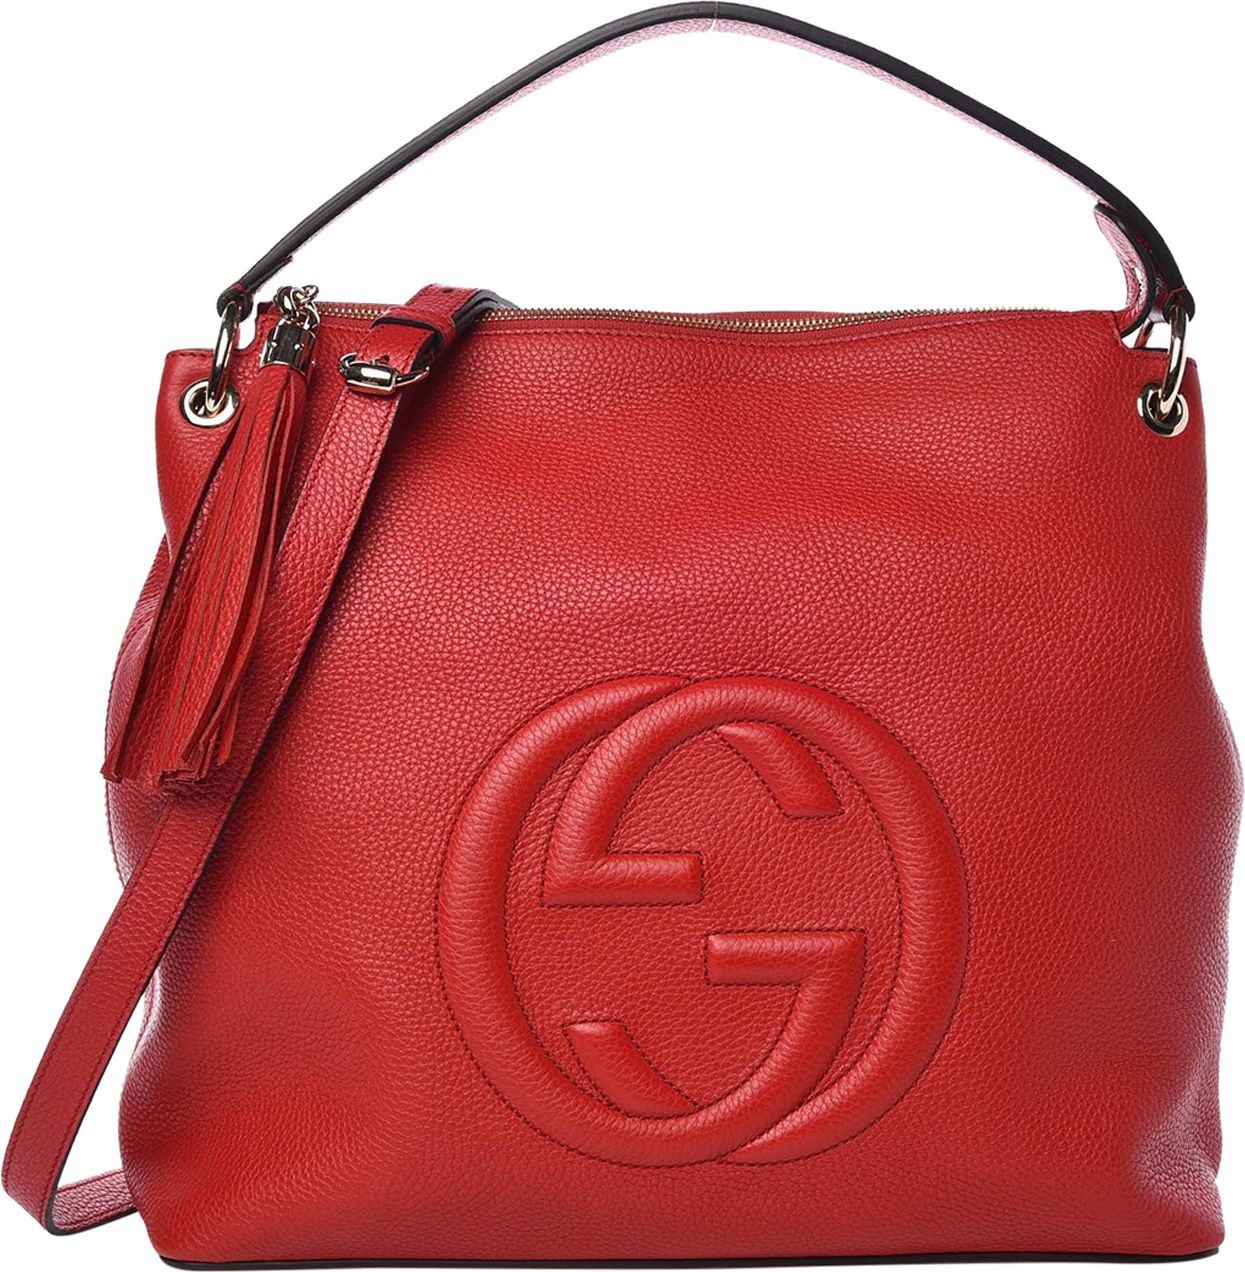 Gucci Soho Hobo Tote – Instant Finds